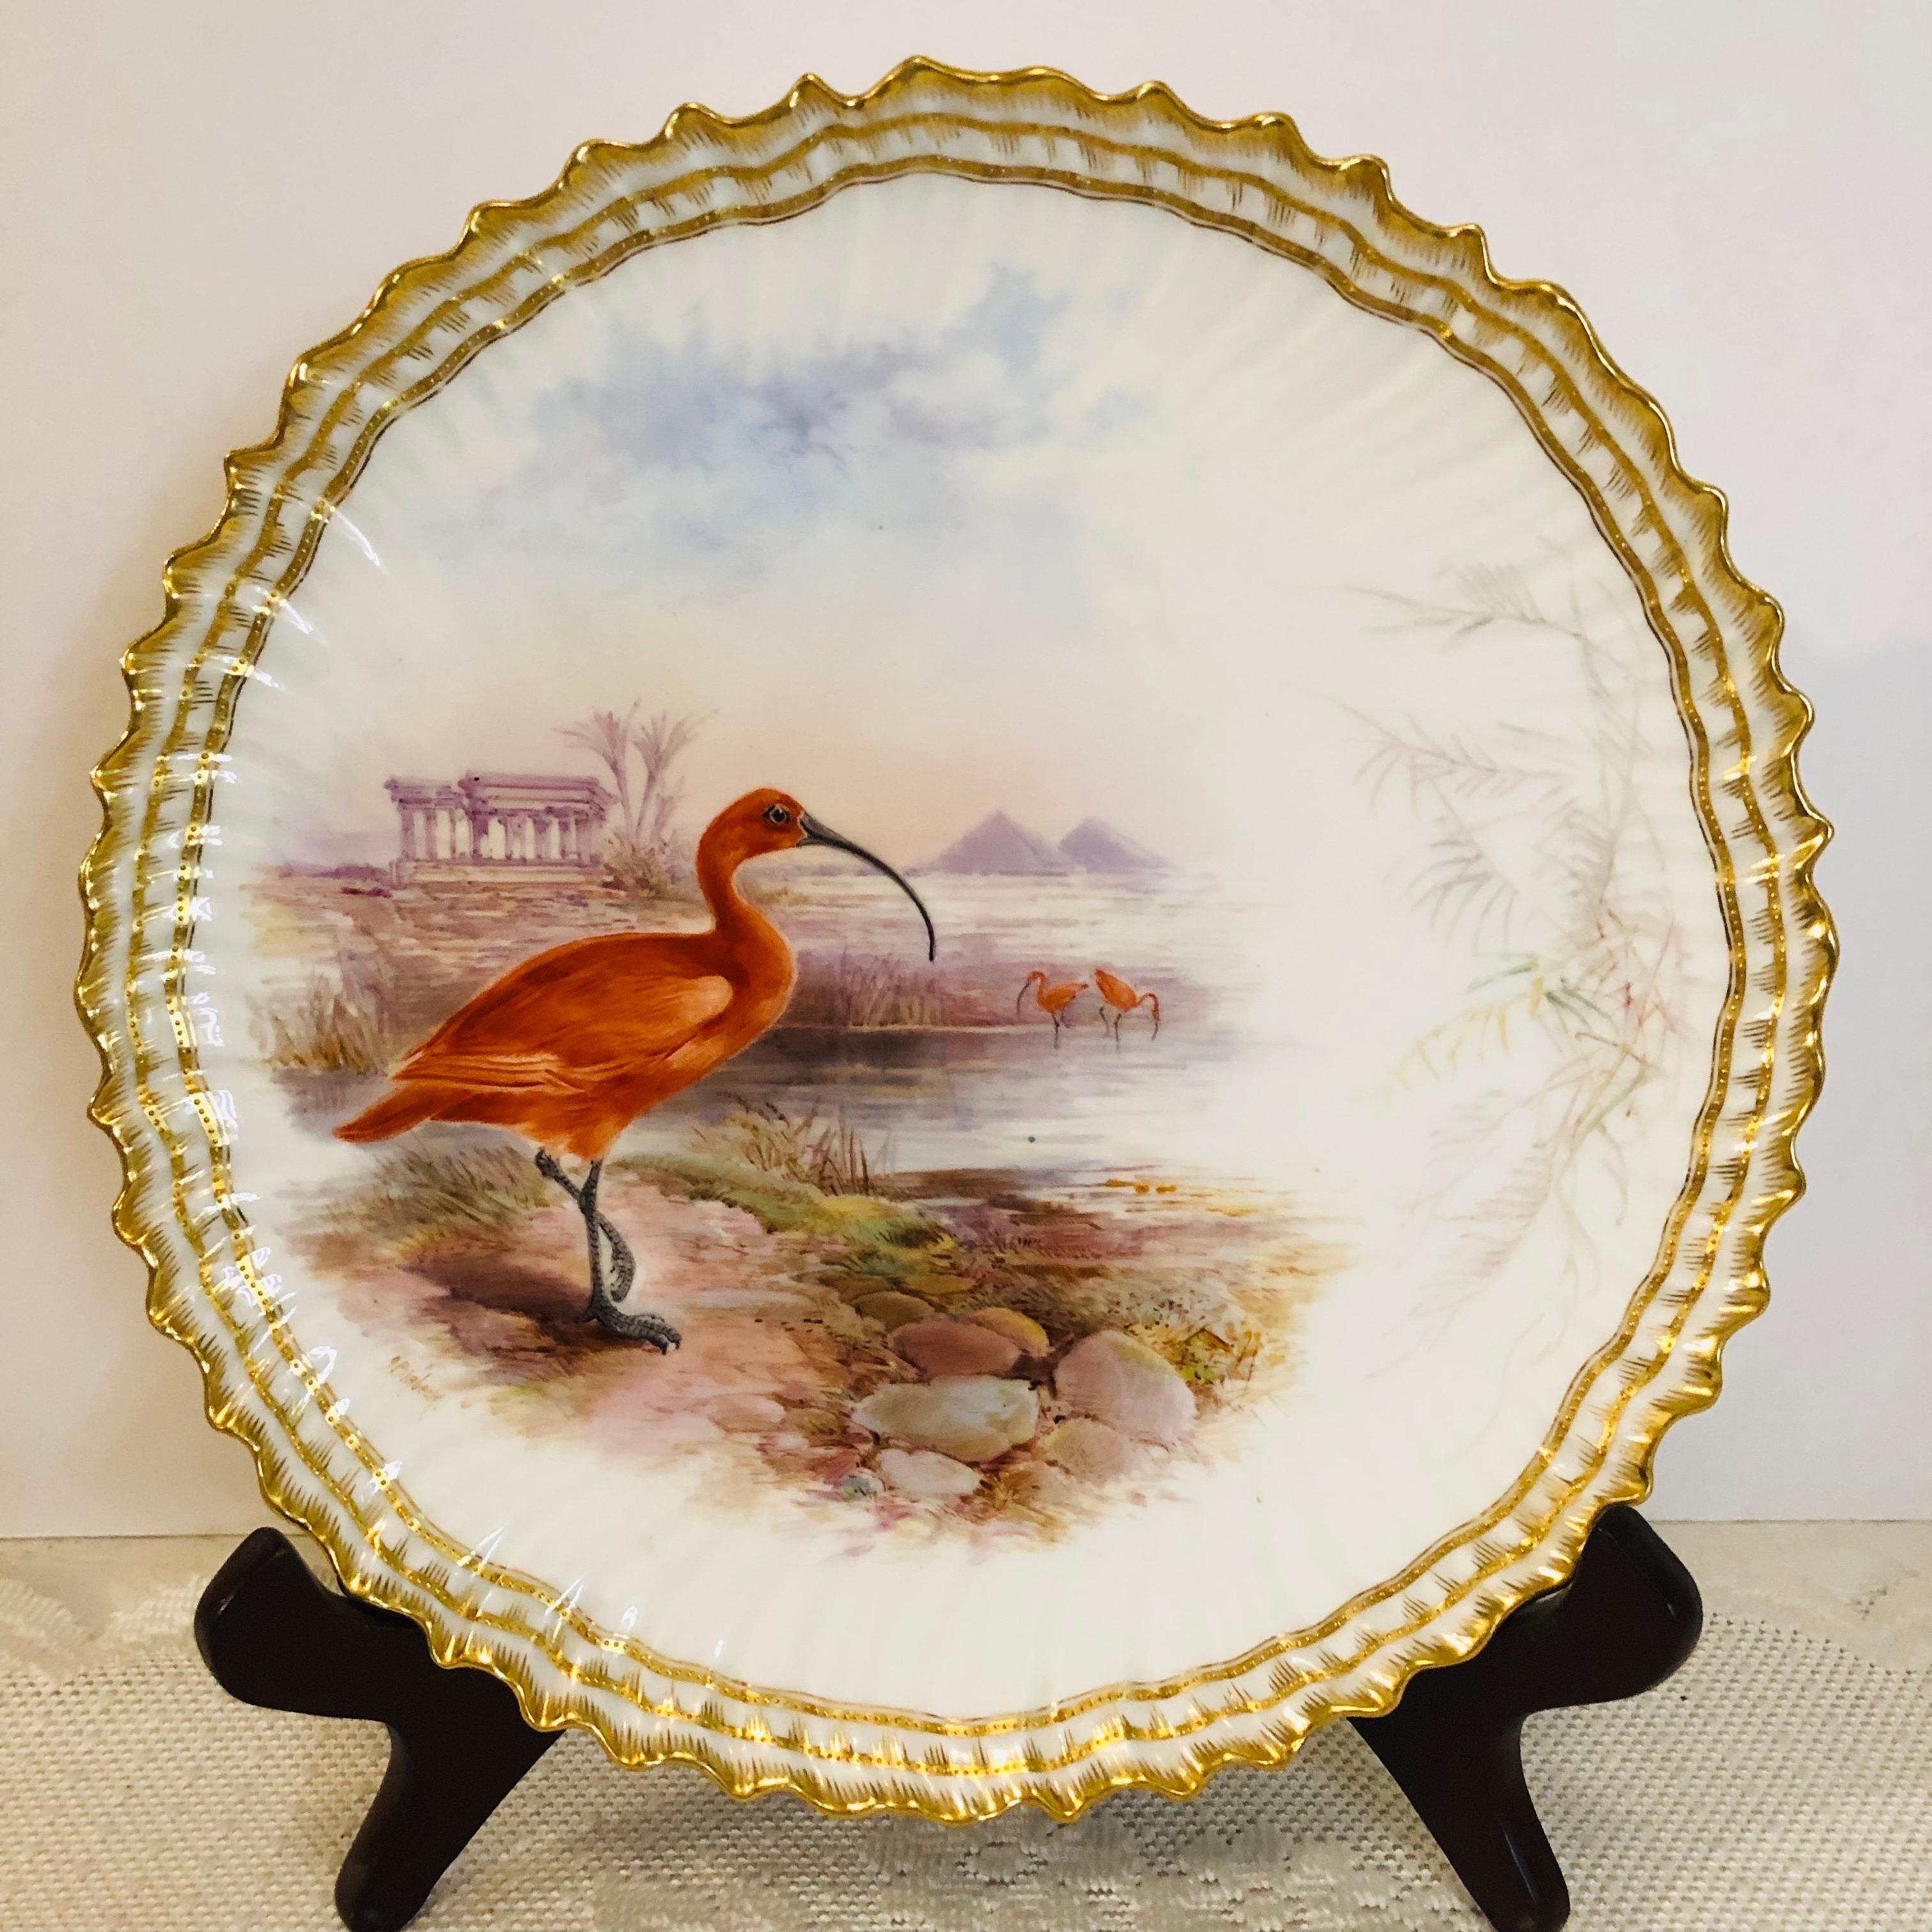 Set of 11 Cauldon Plates Each Painted Exquisitely With a Different Bird  8